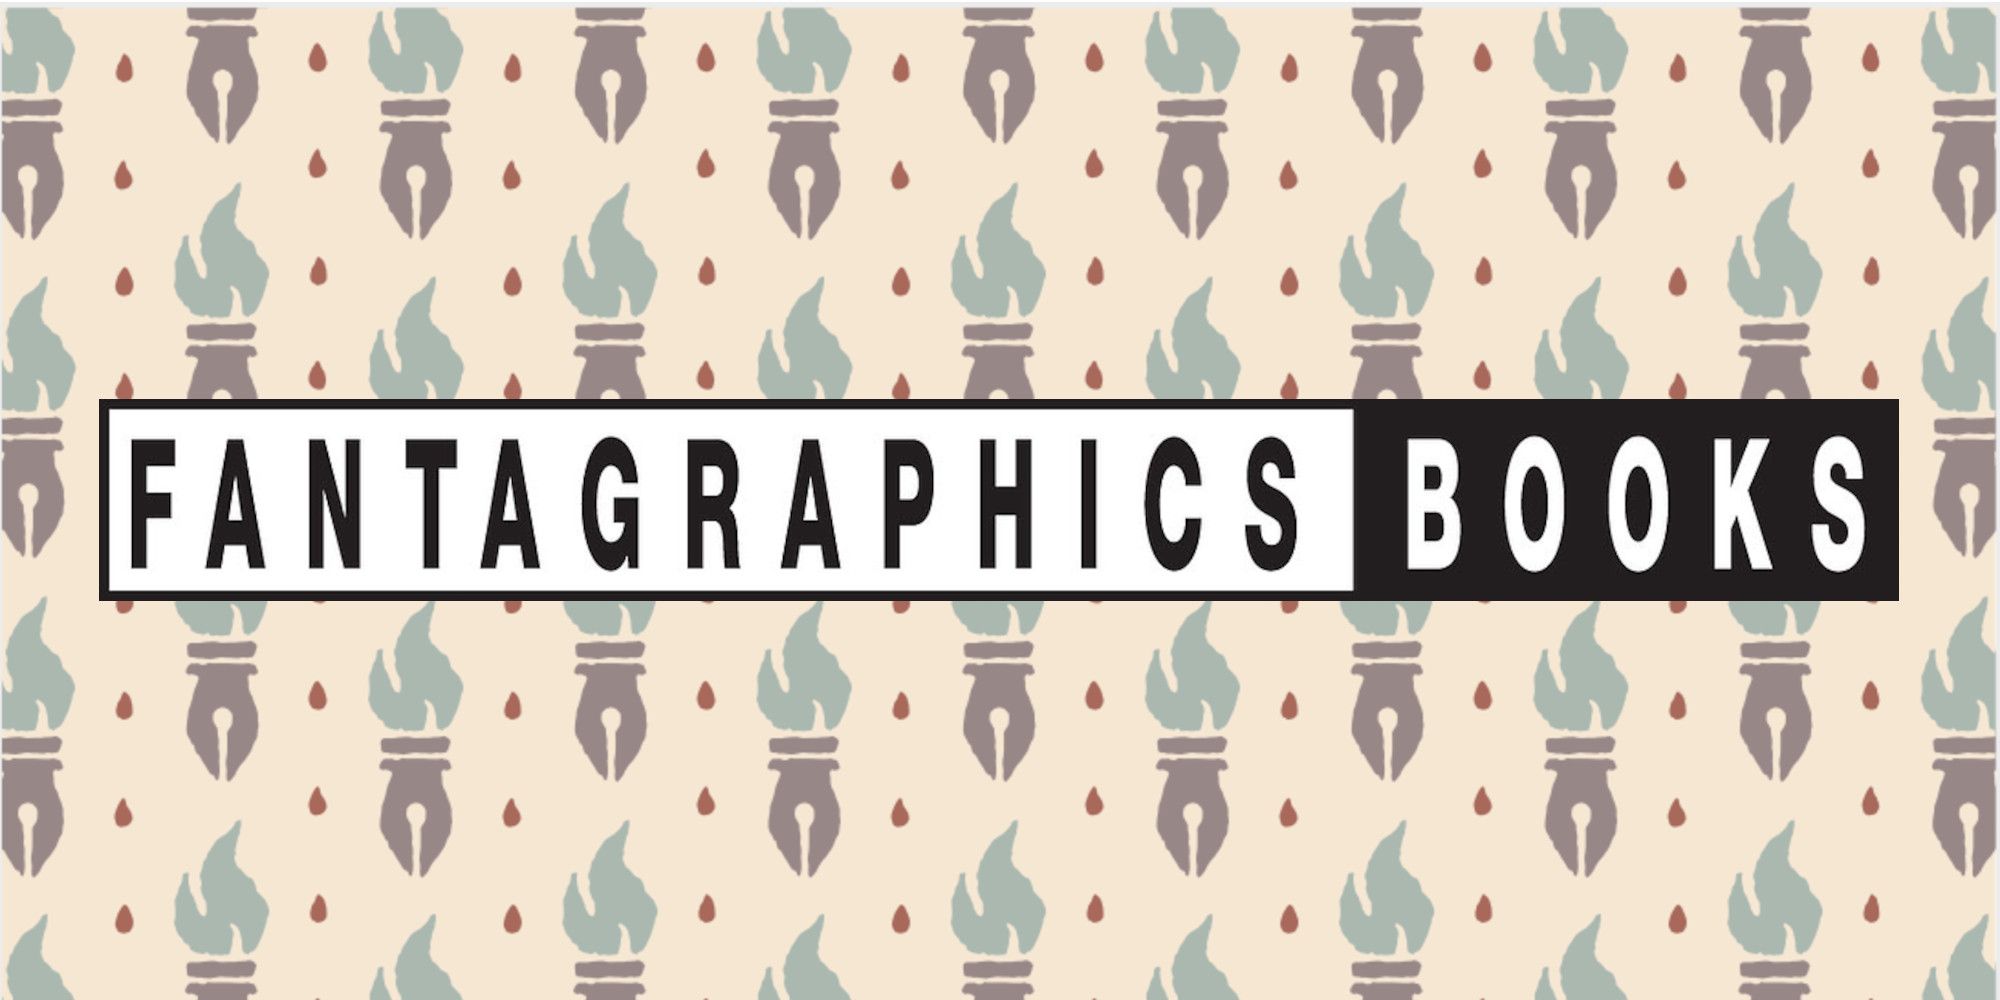 Fantagraphics Books old and new logo header